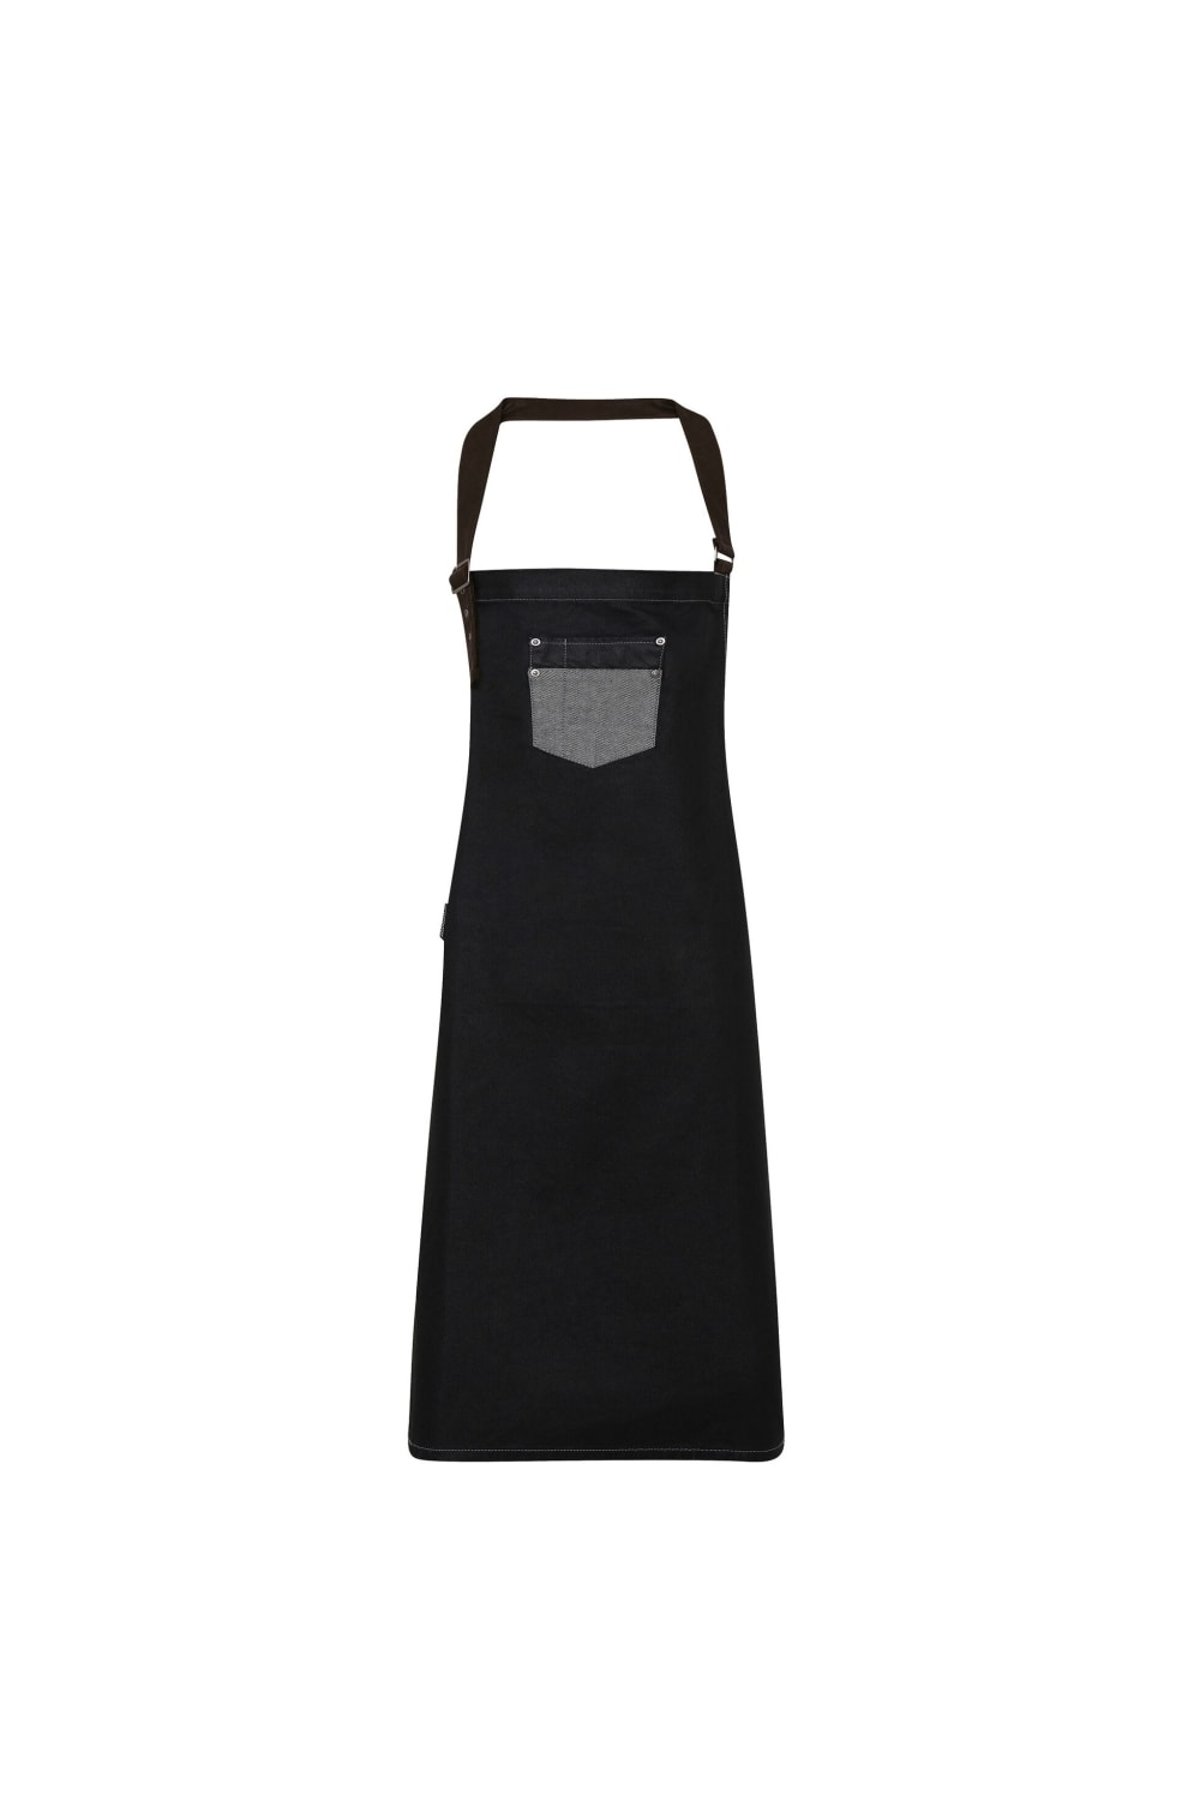 New Premier Adults Apron One Size Adults Full Bib Cooking Apron With One Pocket 